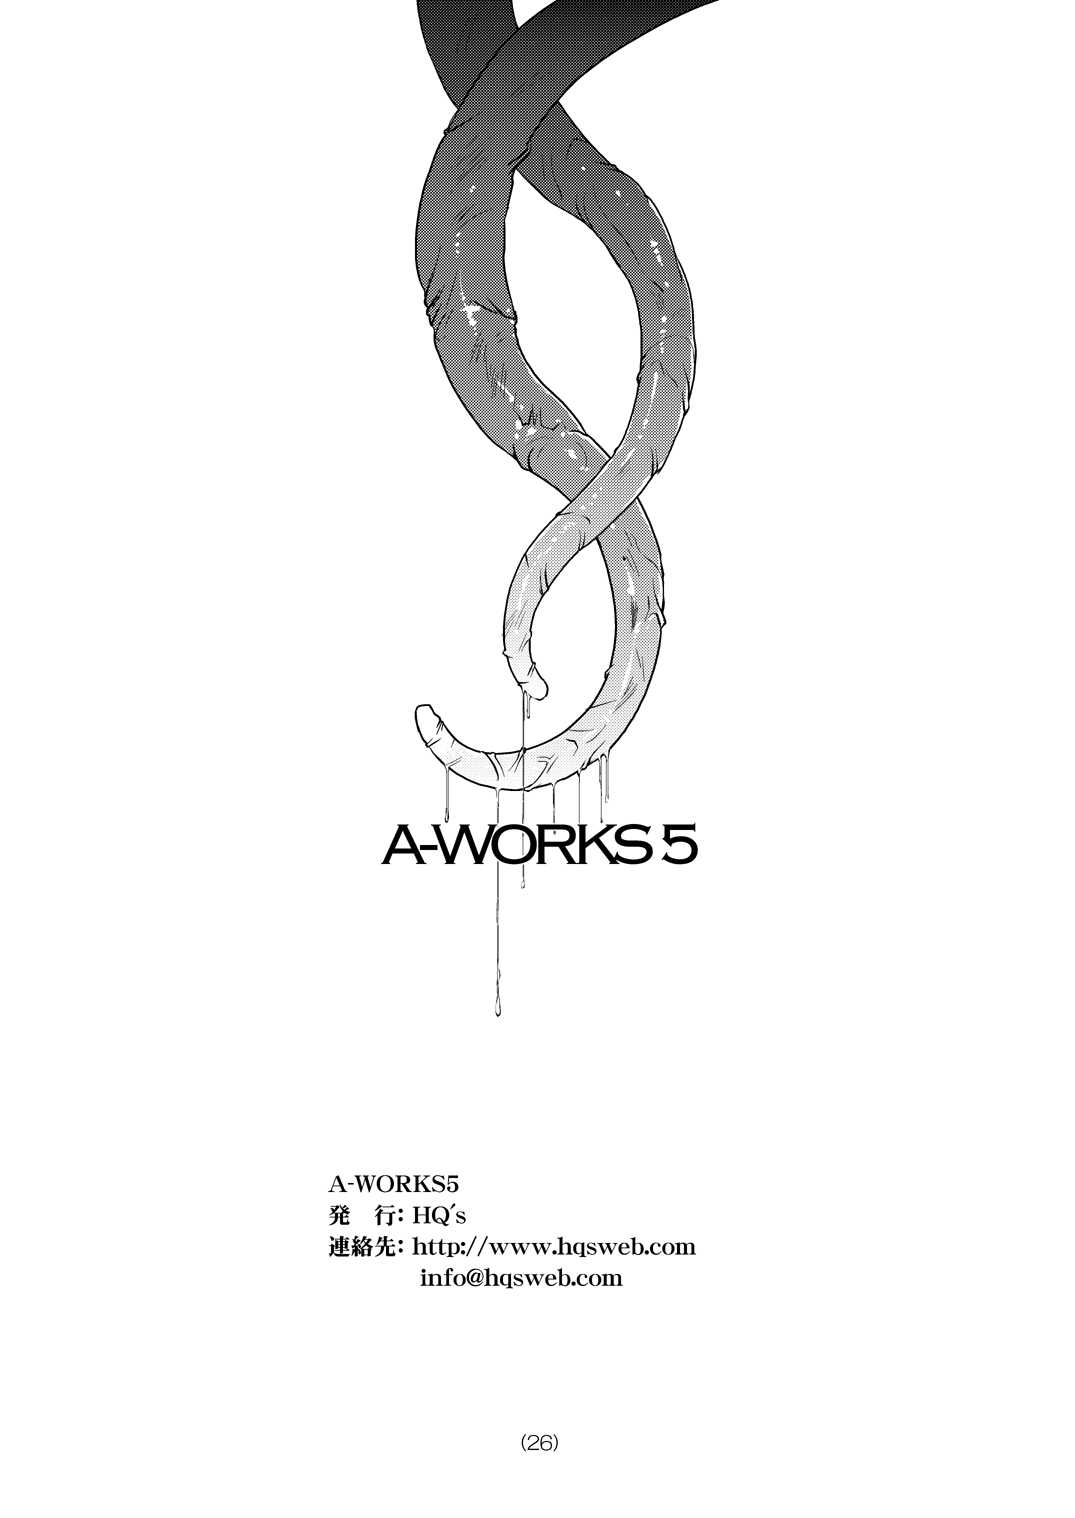 [HQ&#039;s] A-Works 5 